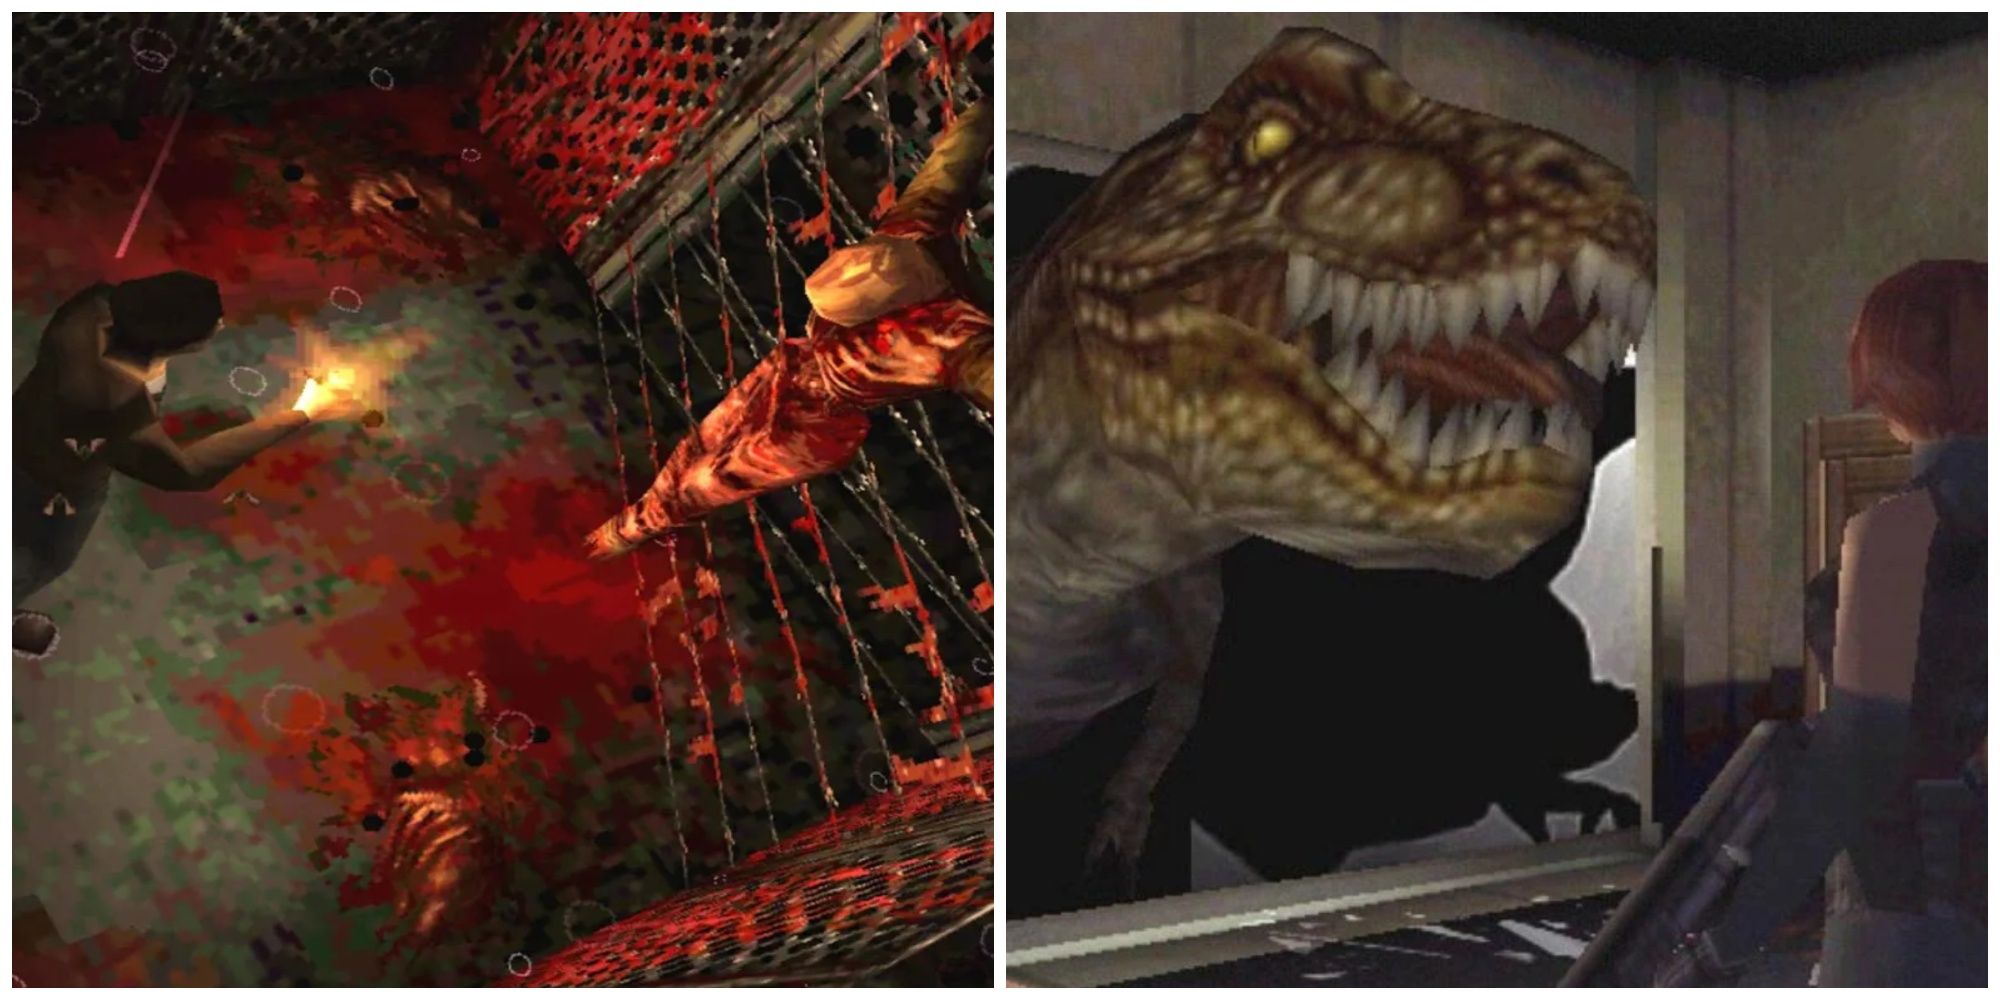 harry from silent hill in an alley and regina from dino crisis facing a t-rex